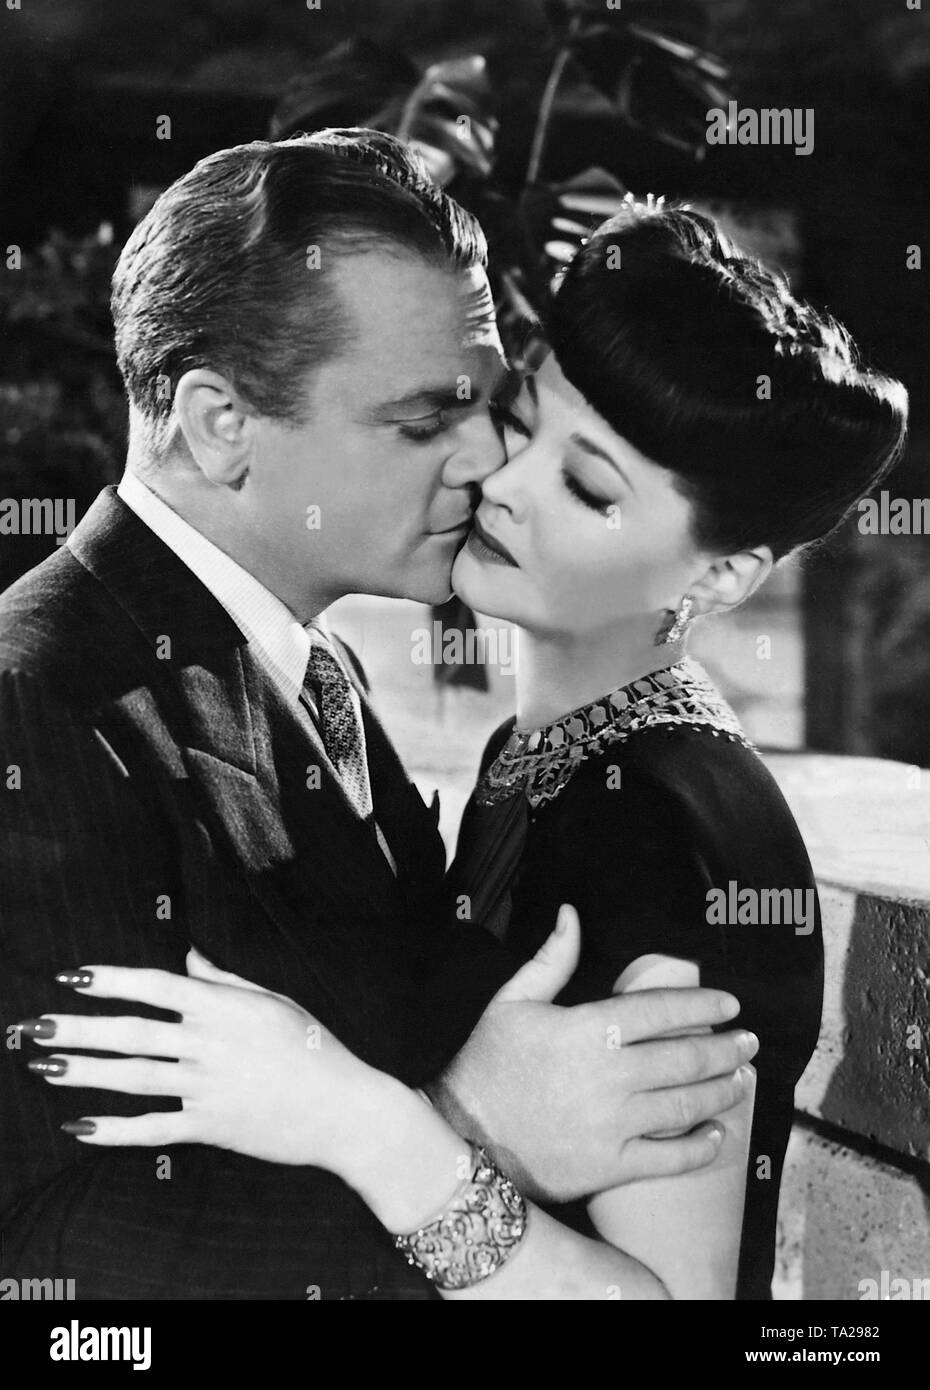 James Cagney and Sylvia Sidney in 'Blood on the Sun', directed by Frank Lloyd, USA 1945. Stock Photo